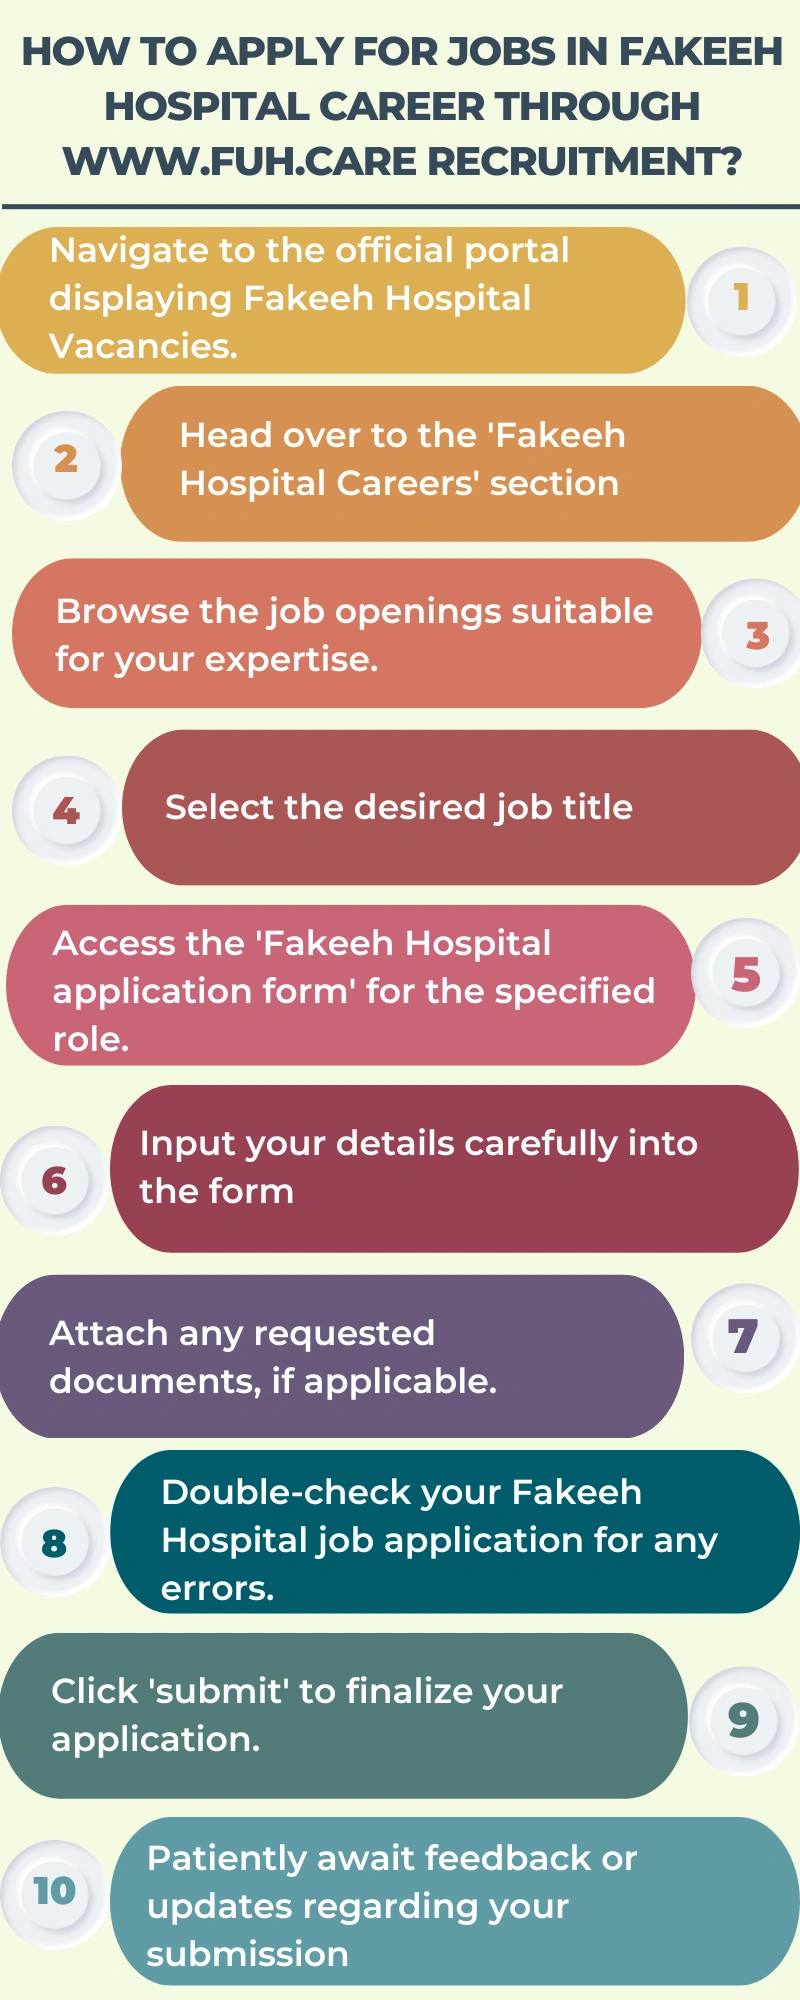 How to Apply for Jobs in Fakeeh Hospital Career through www.fuh.care recruitment_